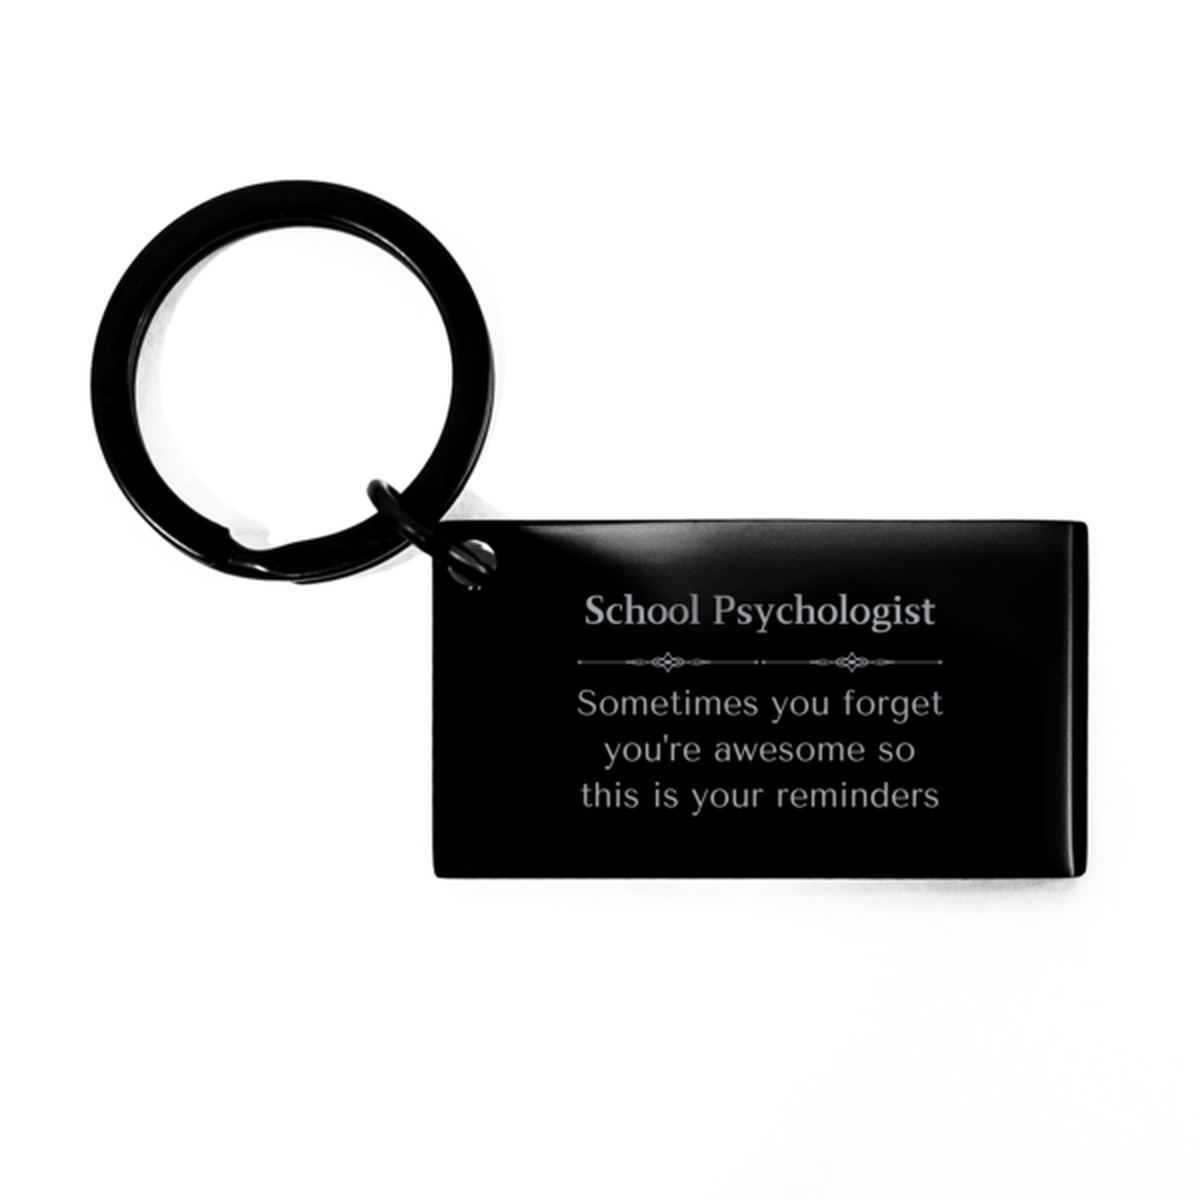 Sentimental School Psychologist Keychain, Transcriptionist Sometimes you forget you're awesome so this is your reminders, Graduation Christmas Birthday Gifts for School Psychologist, Men, Women, Coworkers